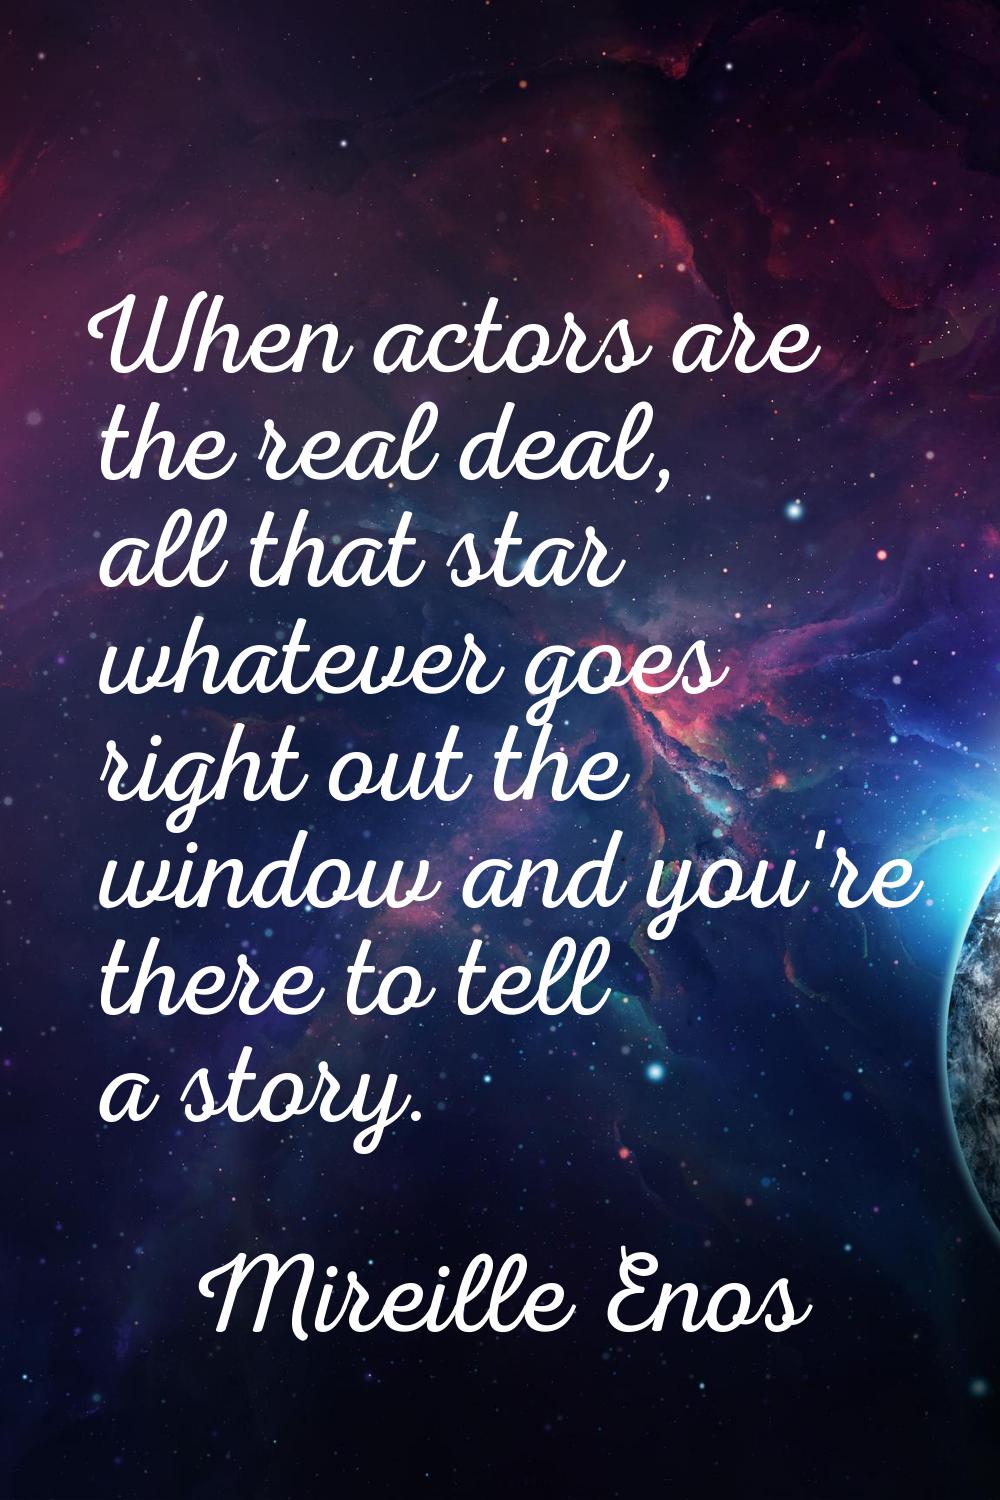 When actors are the real deal, all that star whatever goes right out the window and you're there to